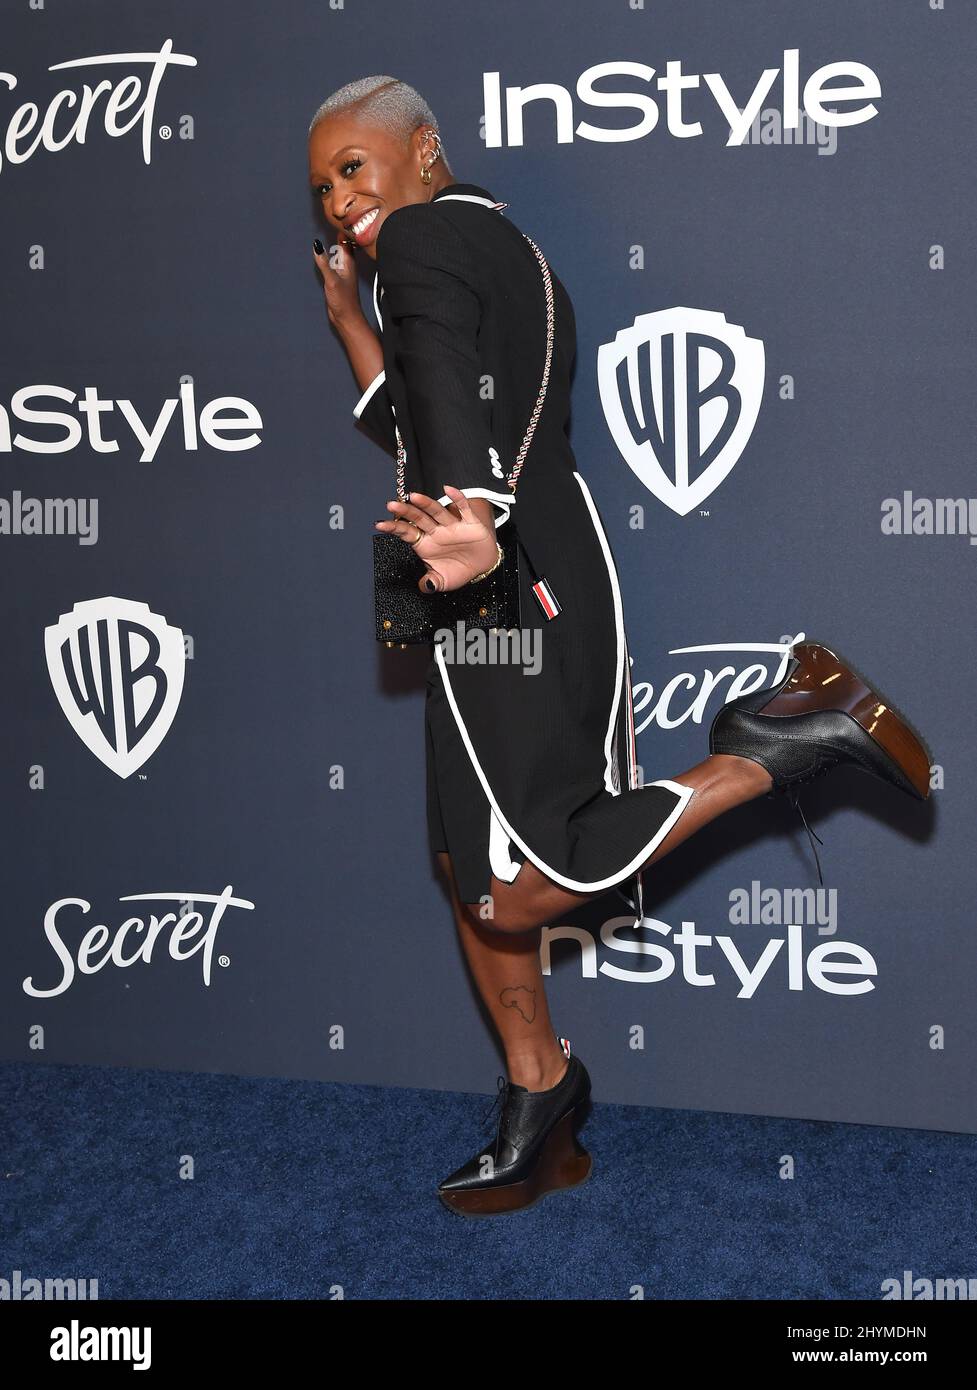 Cynthia Erivo at the Instyle and Warner Bros Golden Globes After Party held at the Beverly Hilton Hotel on January 5, 2020 in Beverly Hills, CA. Stock Photo